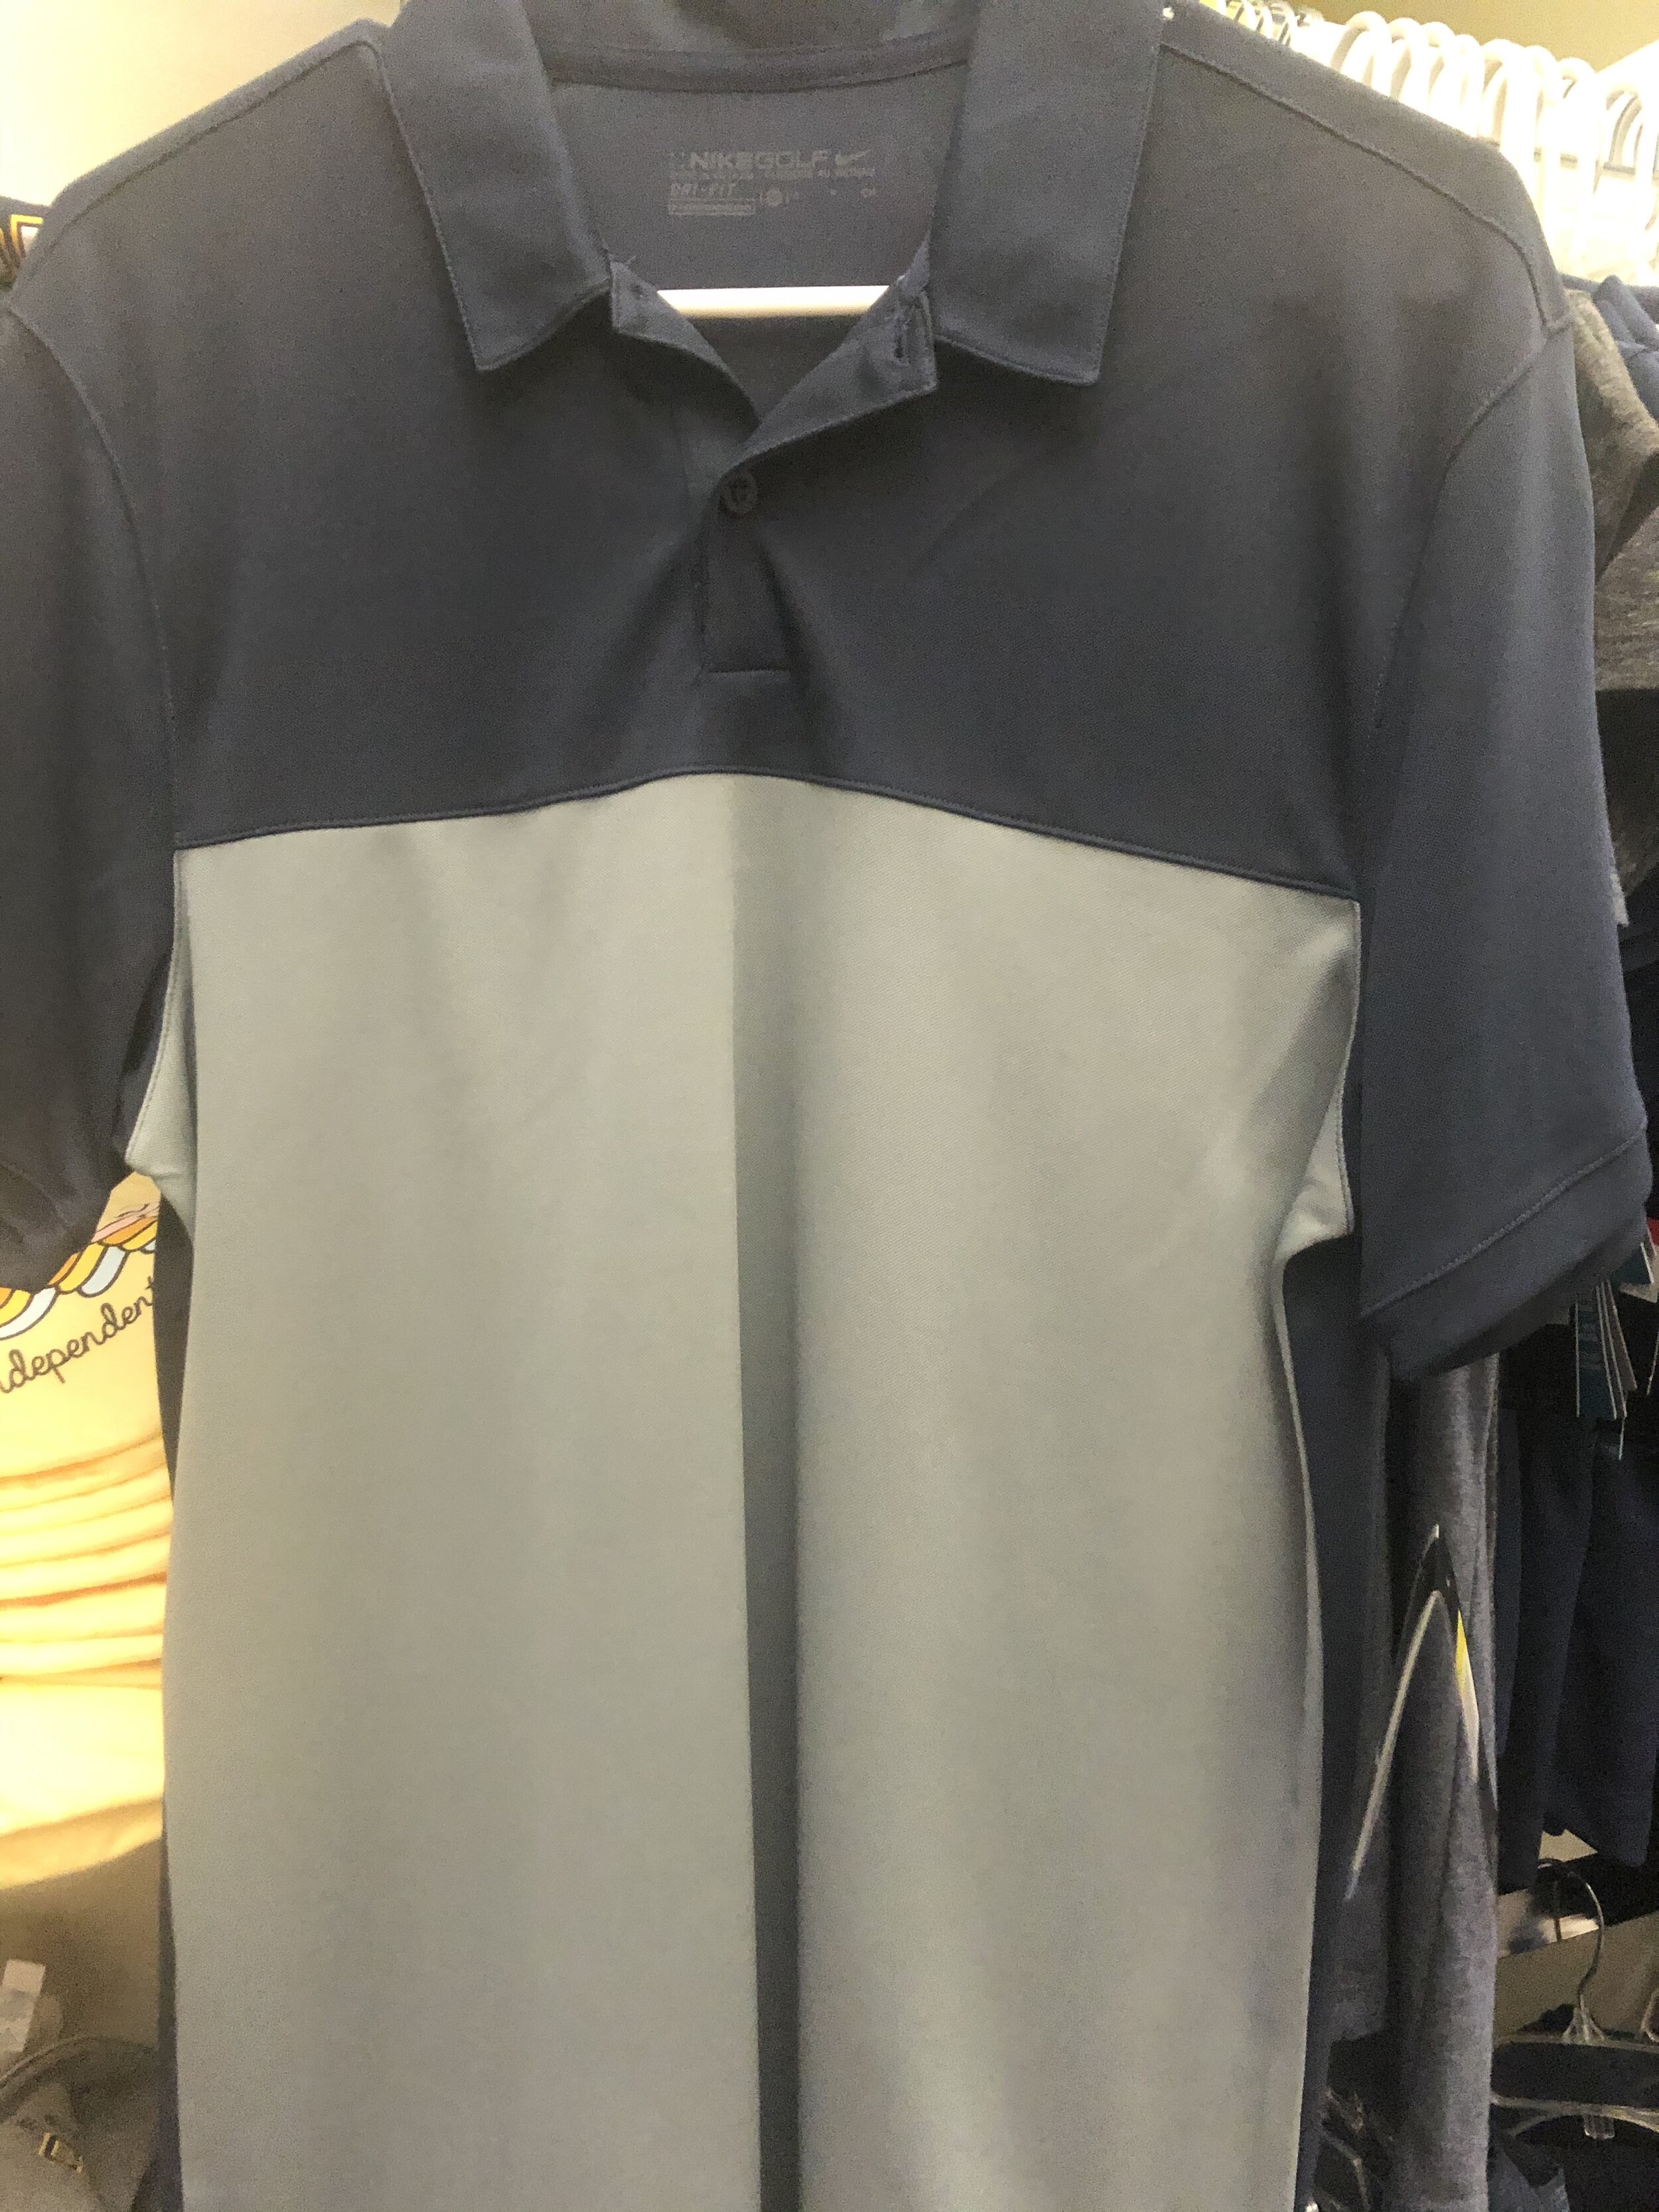 Men's Two-Toned Nike Golf Shirt — Columbia Independent School